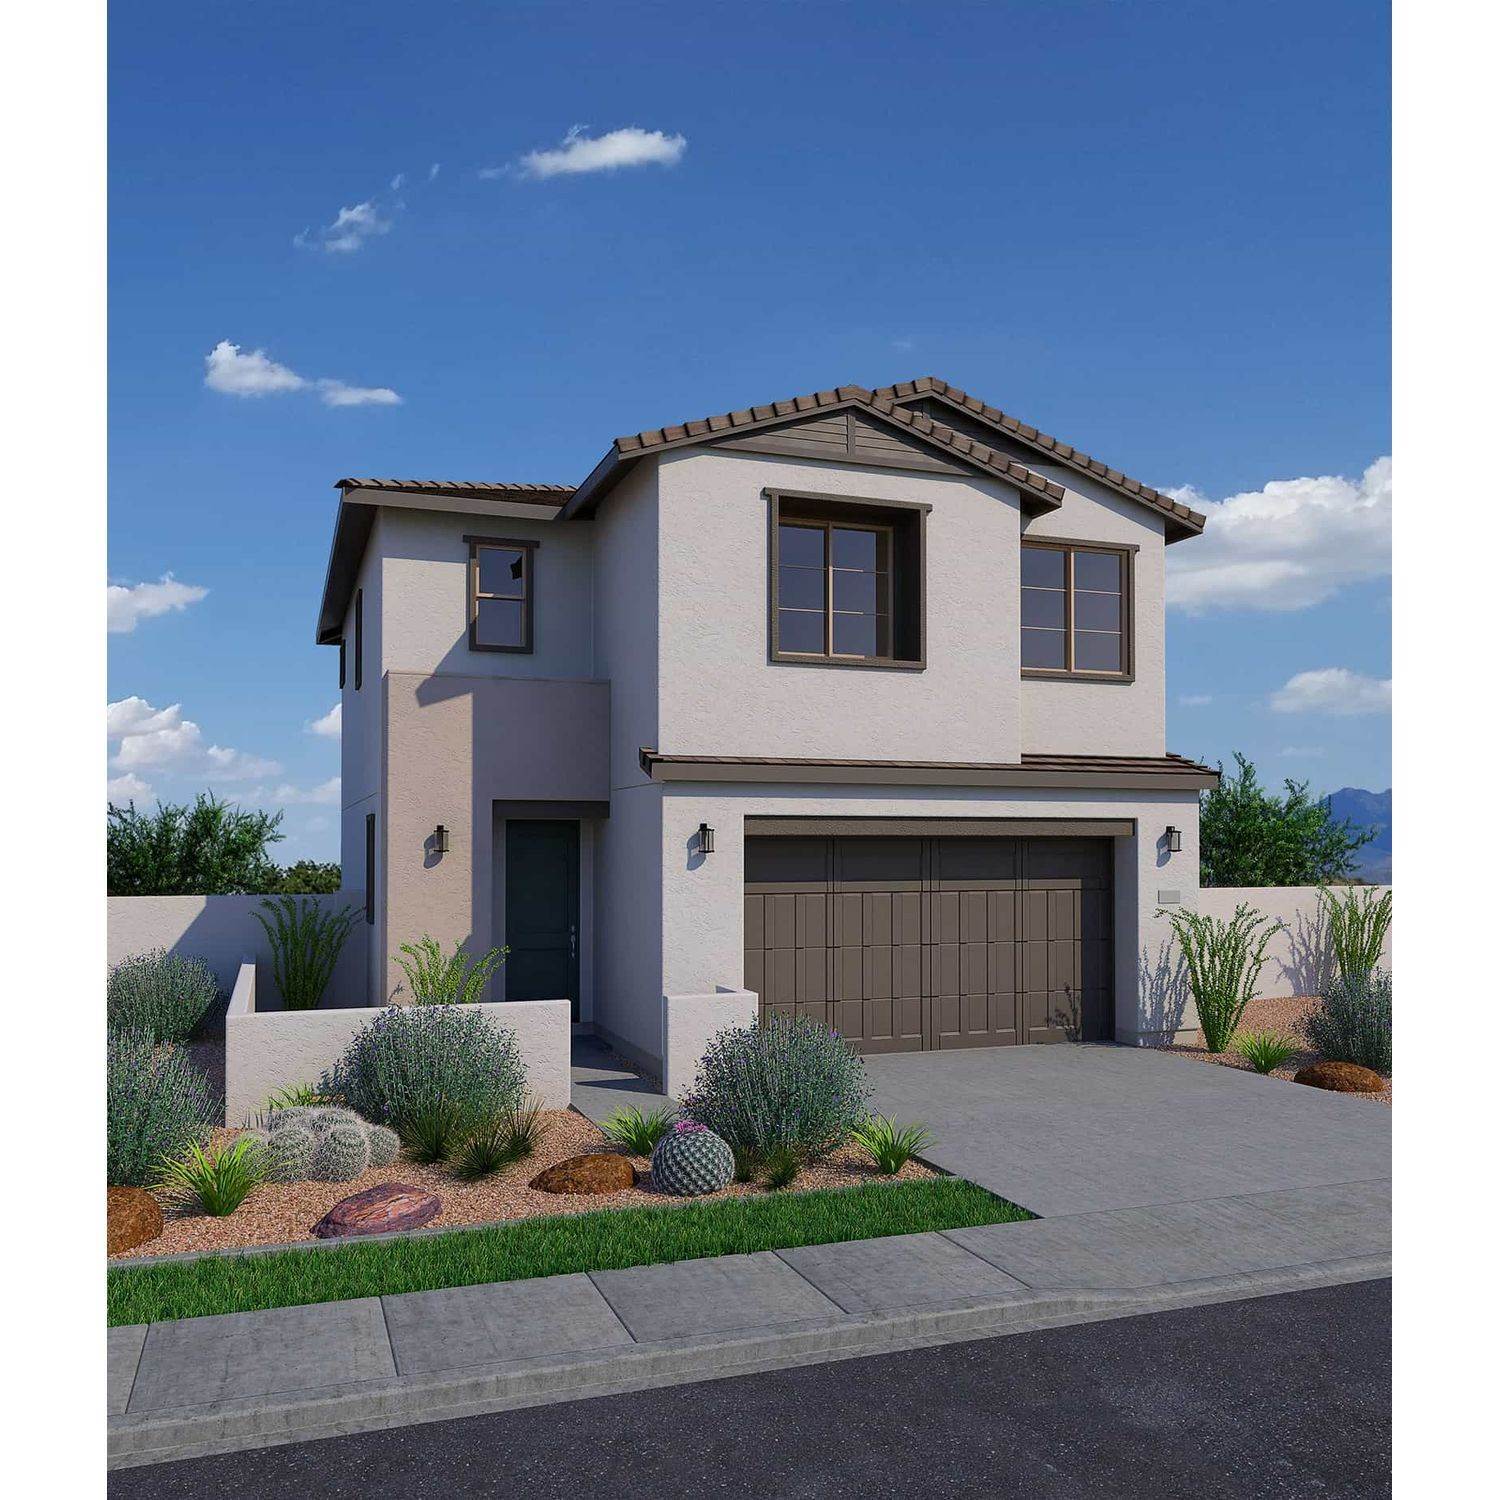 4. Single Family for Sale at Cadence 5751 S. Labelle, Mesa, AZ 85212